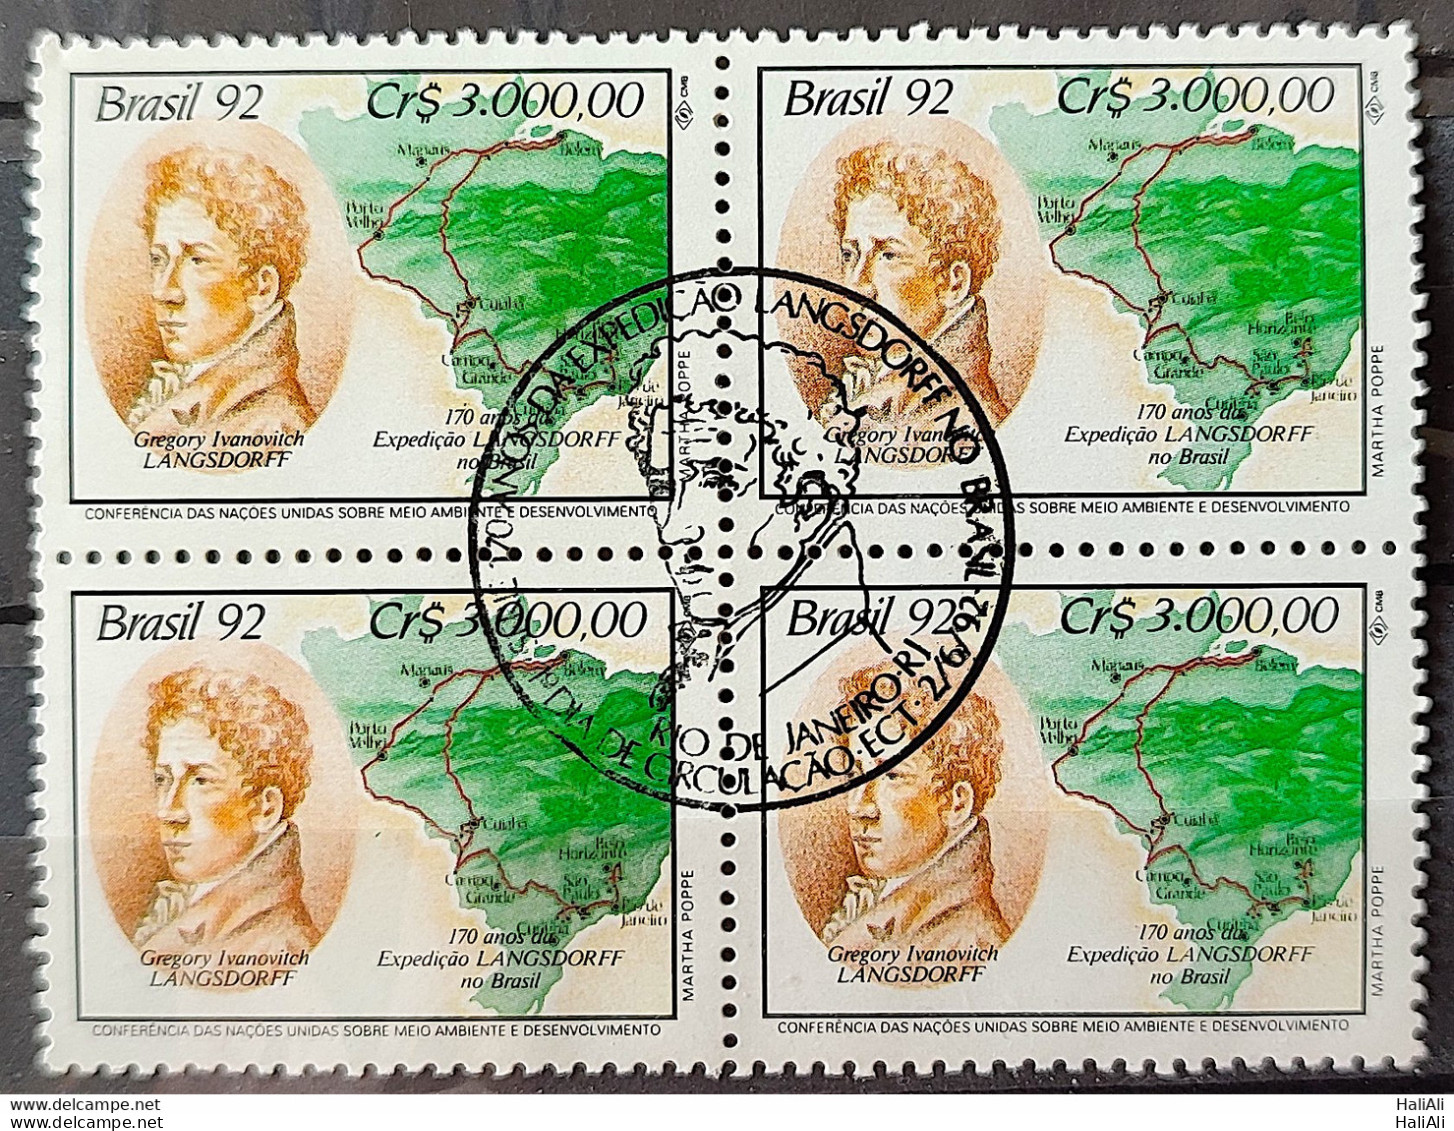 C 1797 Brazil Stamp Expedition Longsdorff Environment Map 1992 Block Of 4 CBC RJ - Unused Stamps